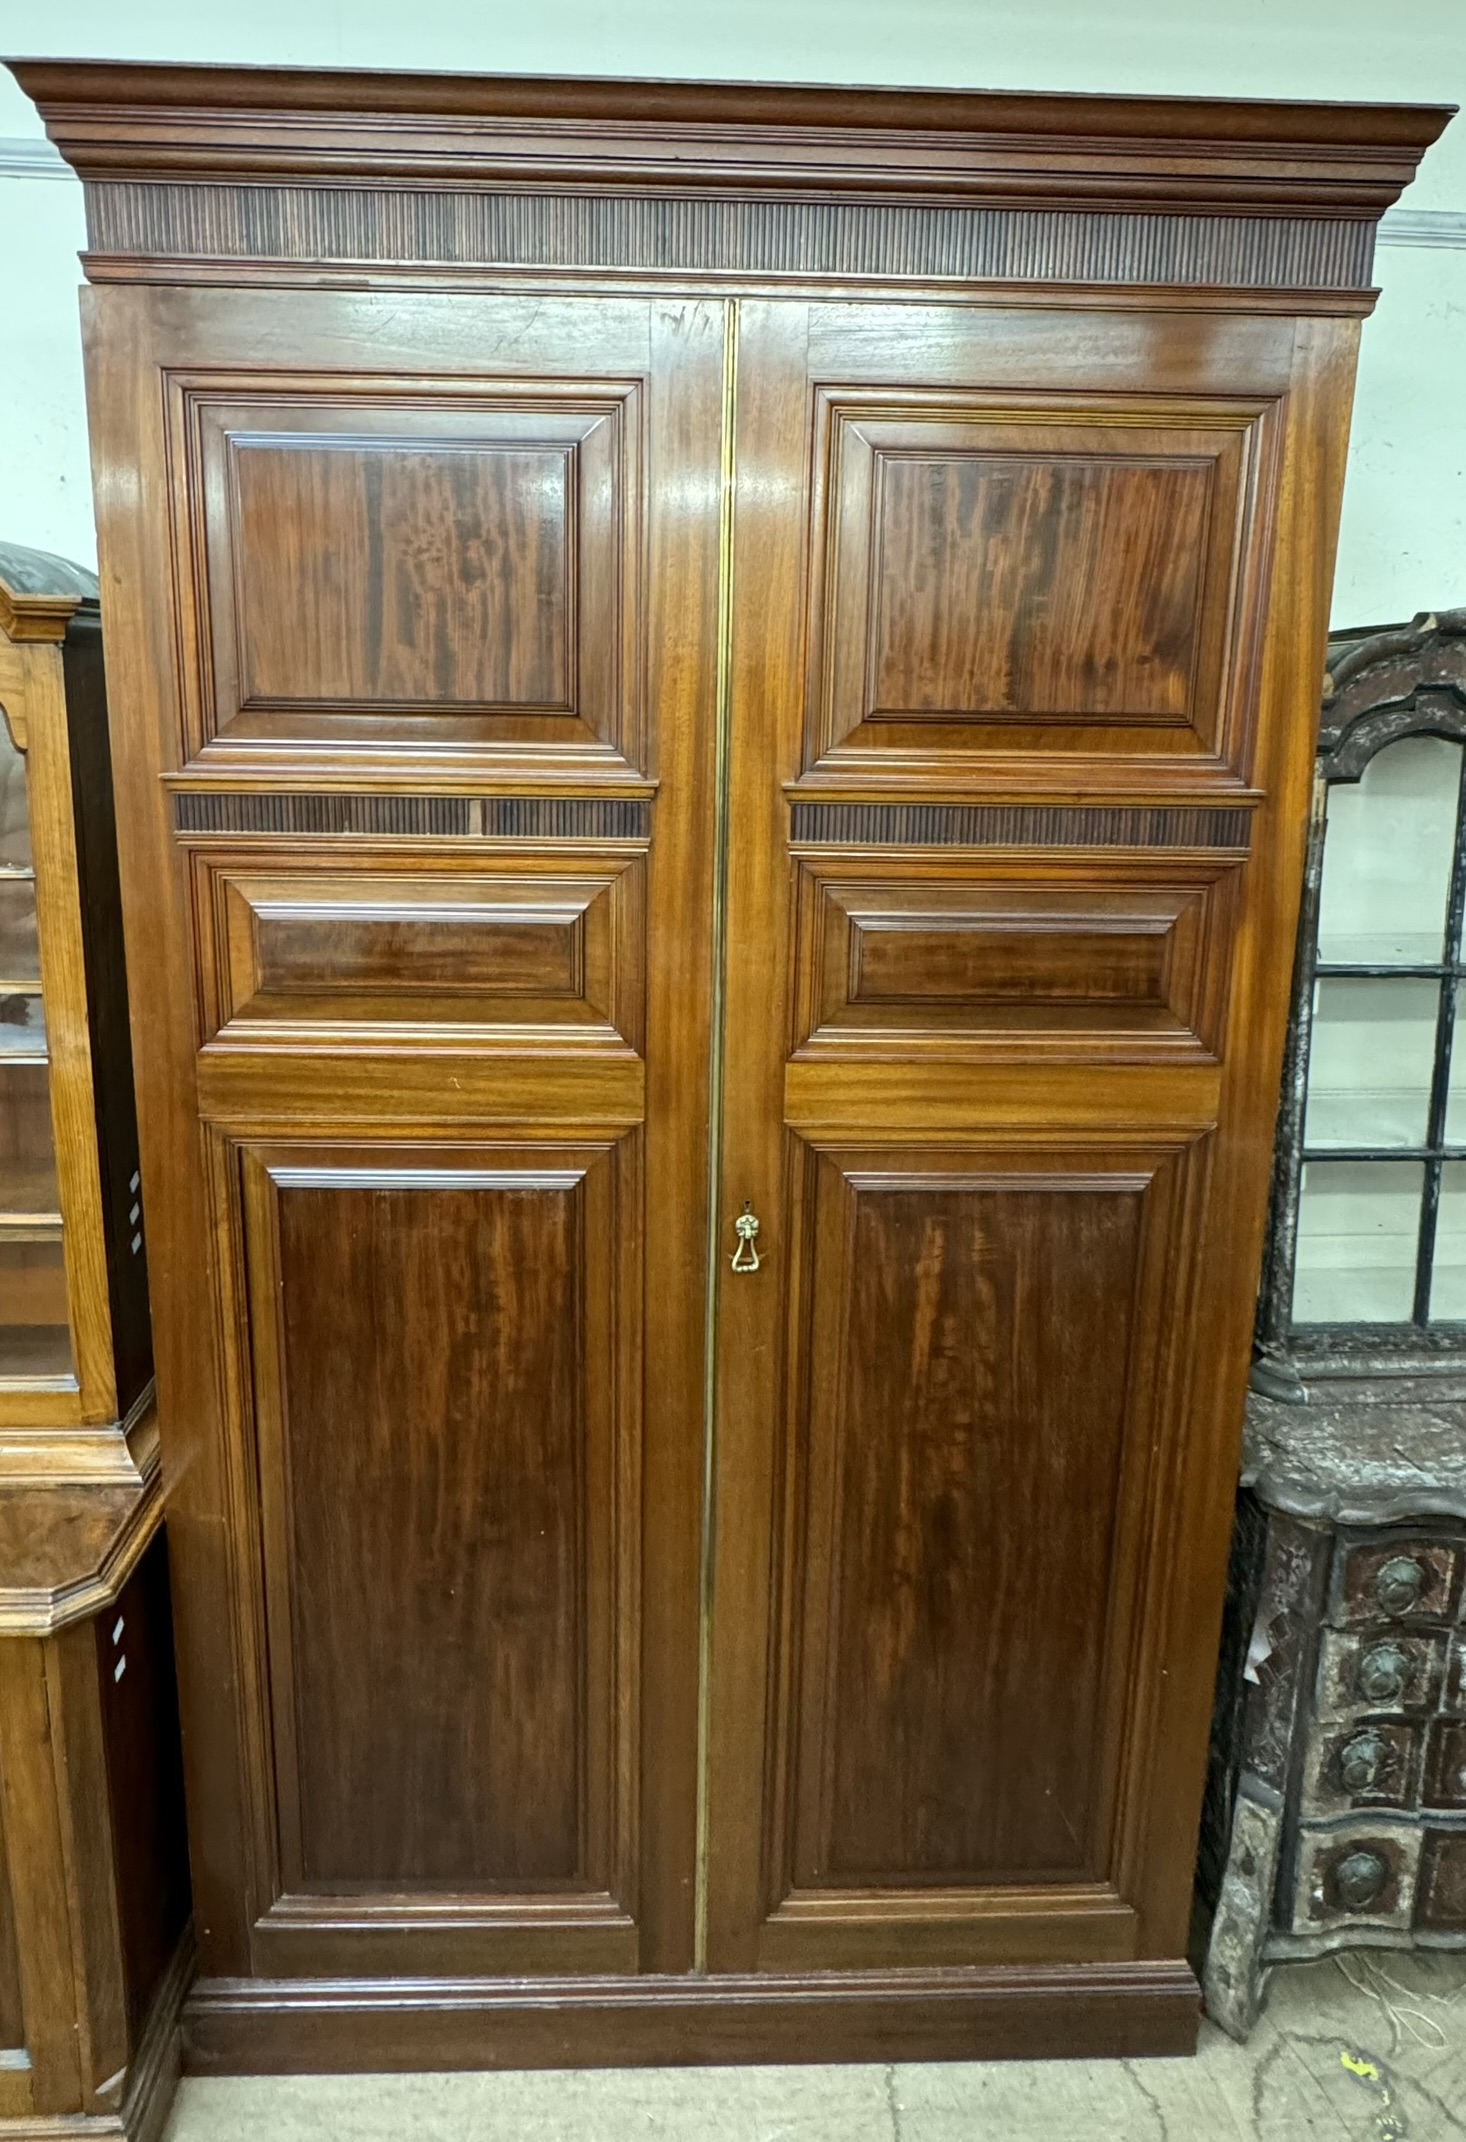 A 19th century mahogany armoire with a moulded cornice and a pair of panelled doors on a plinth